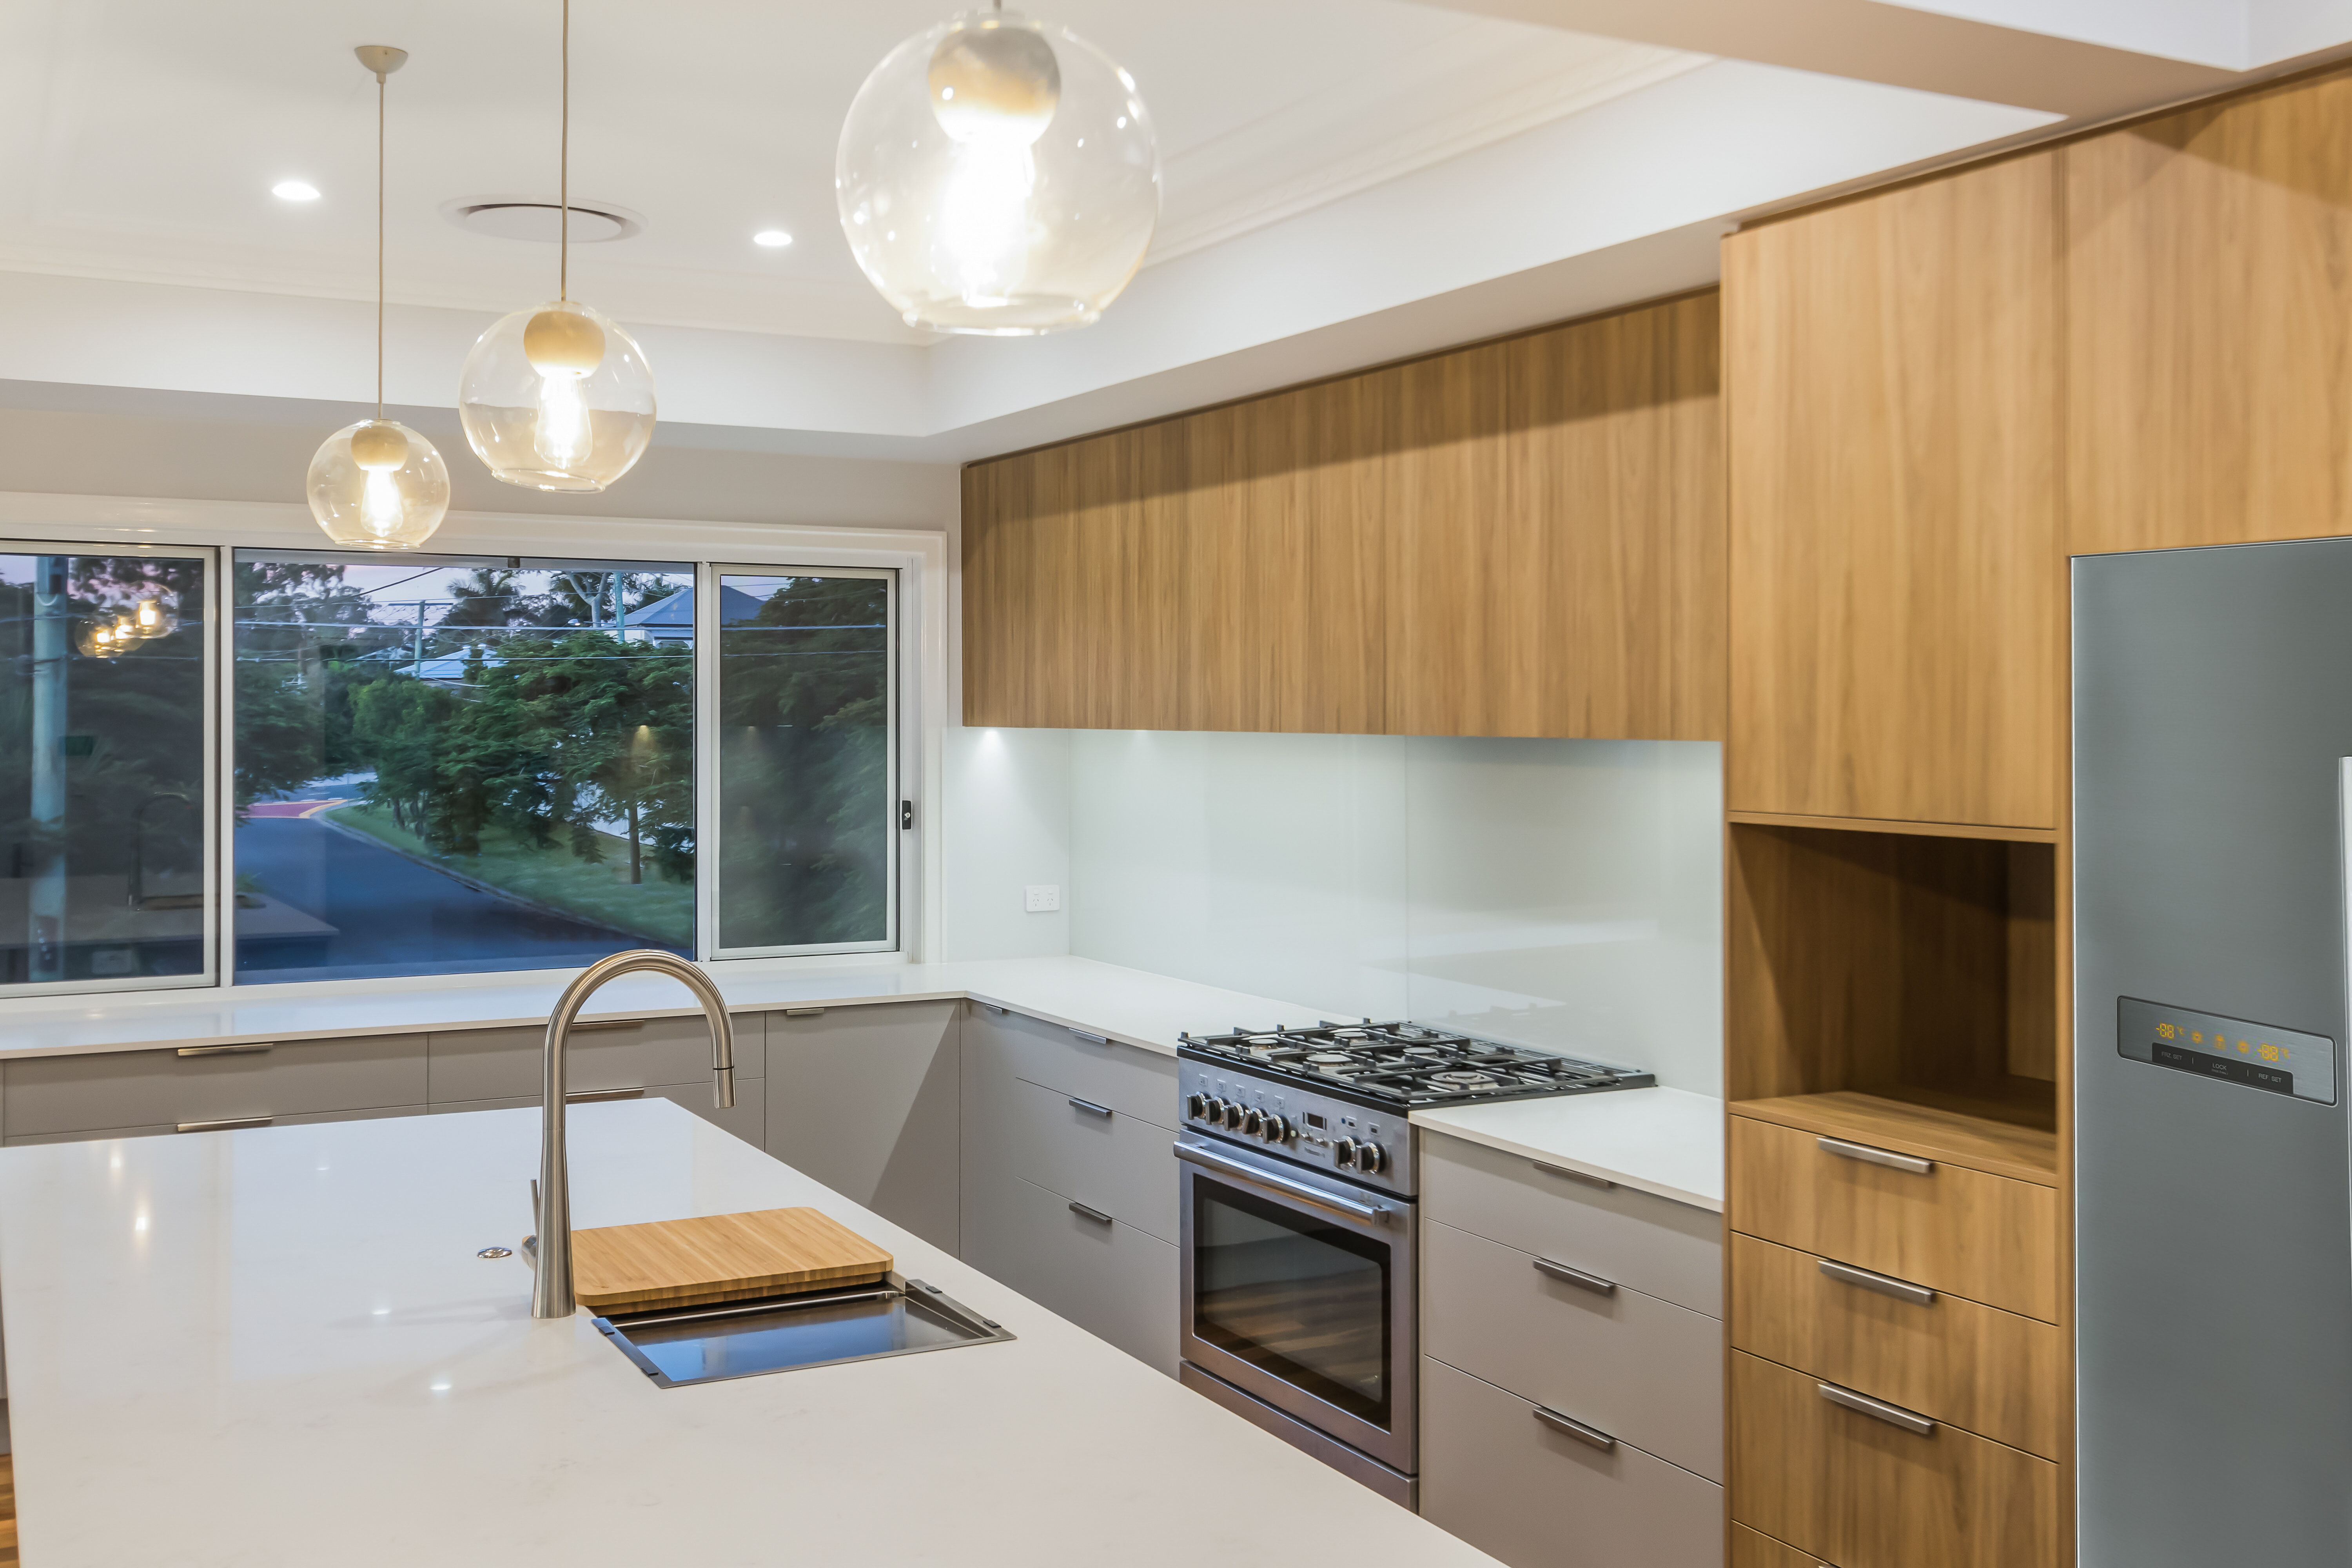 Norman Park Project 3 - Kitchen and Lighting